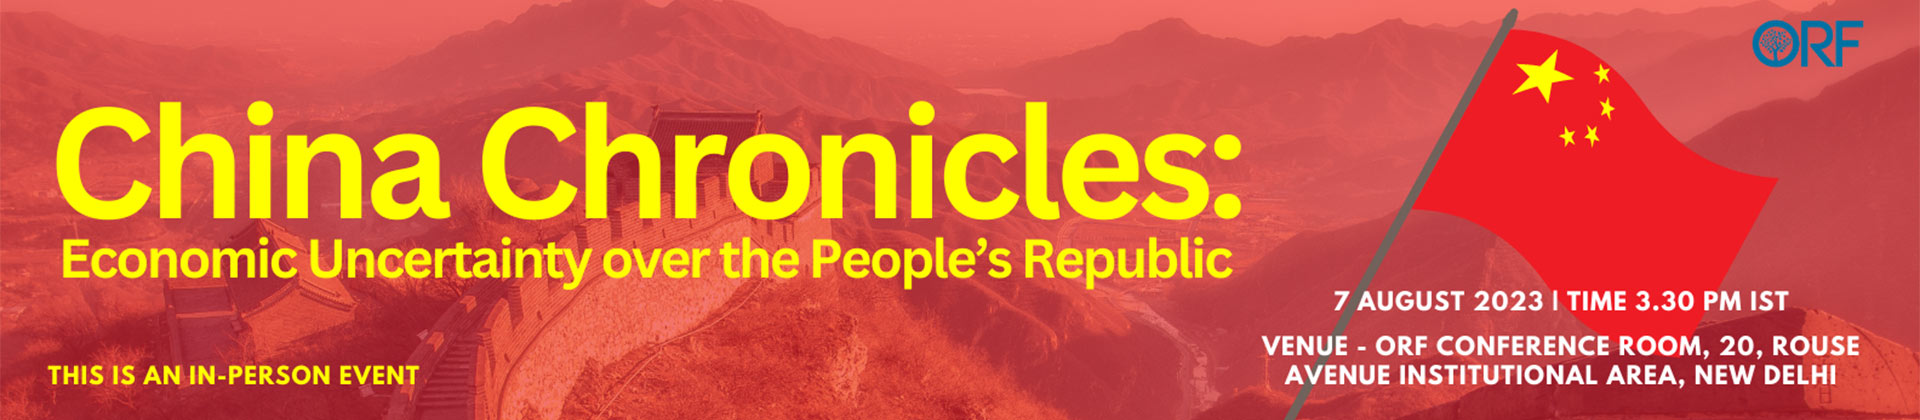 China Chronicles: Economic uncertainty over the People’s Republic